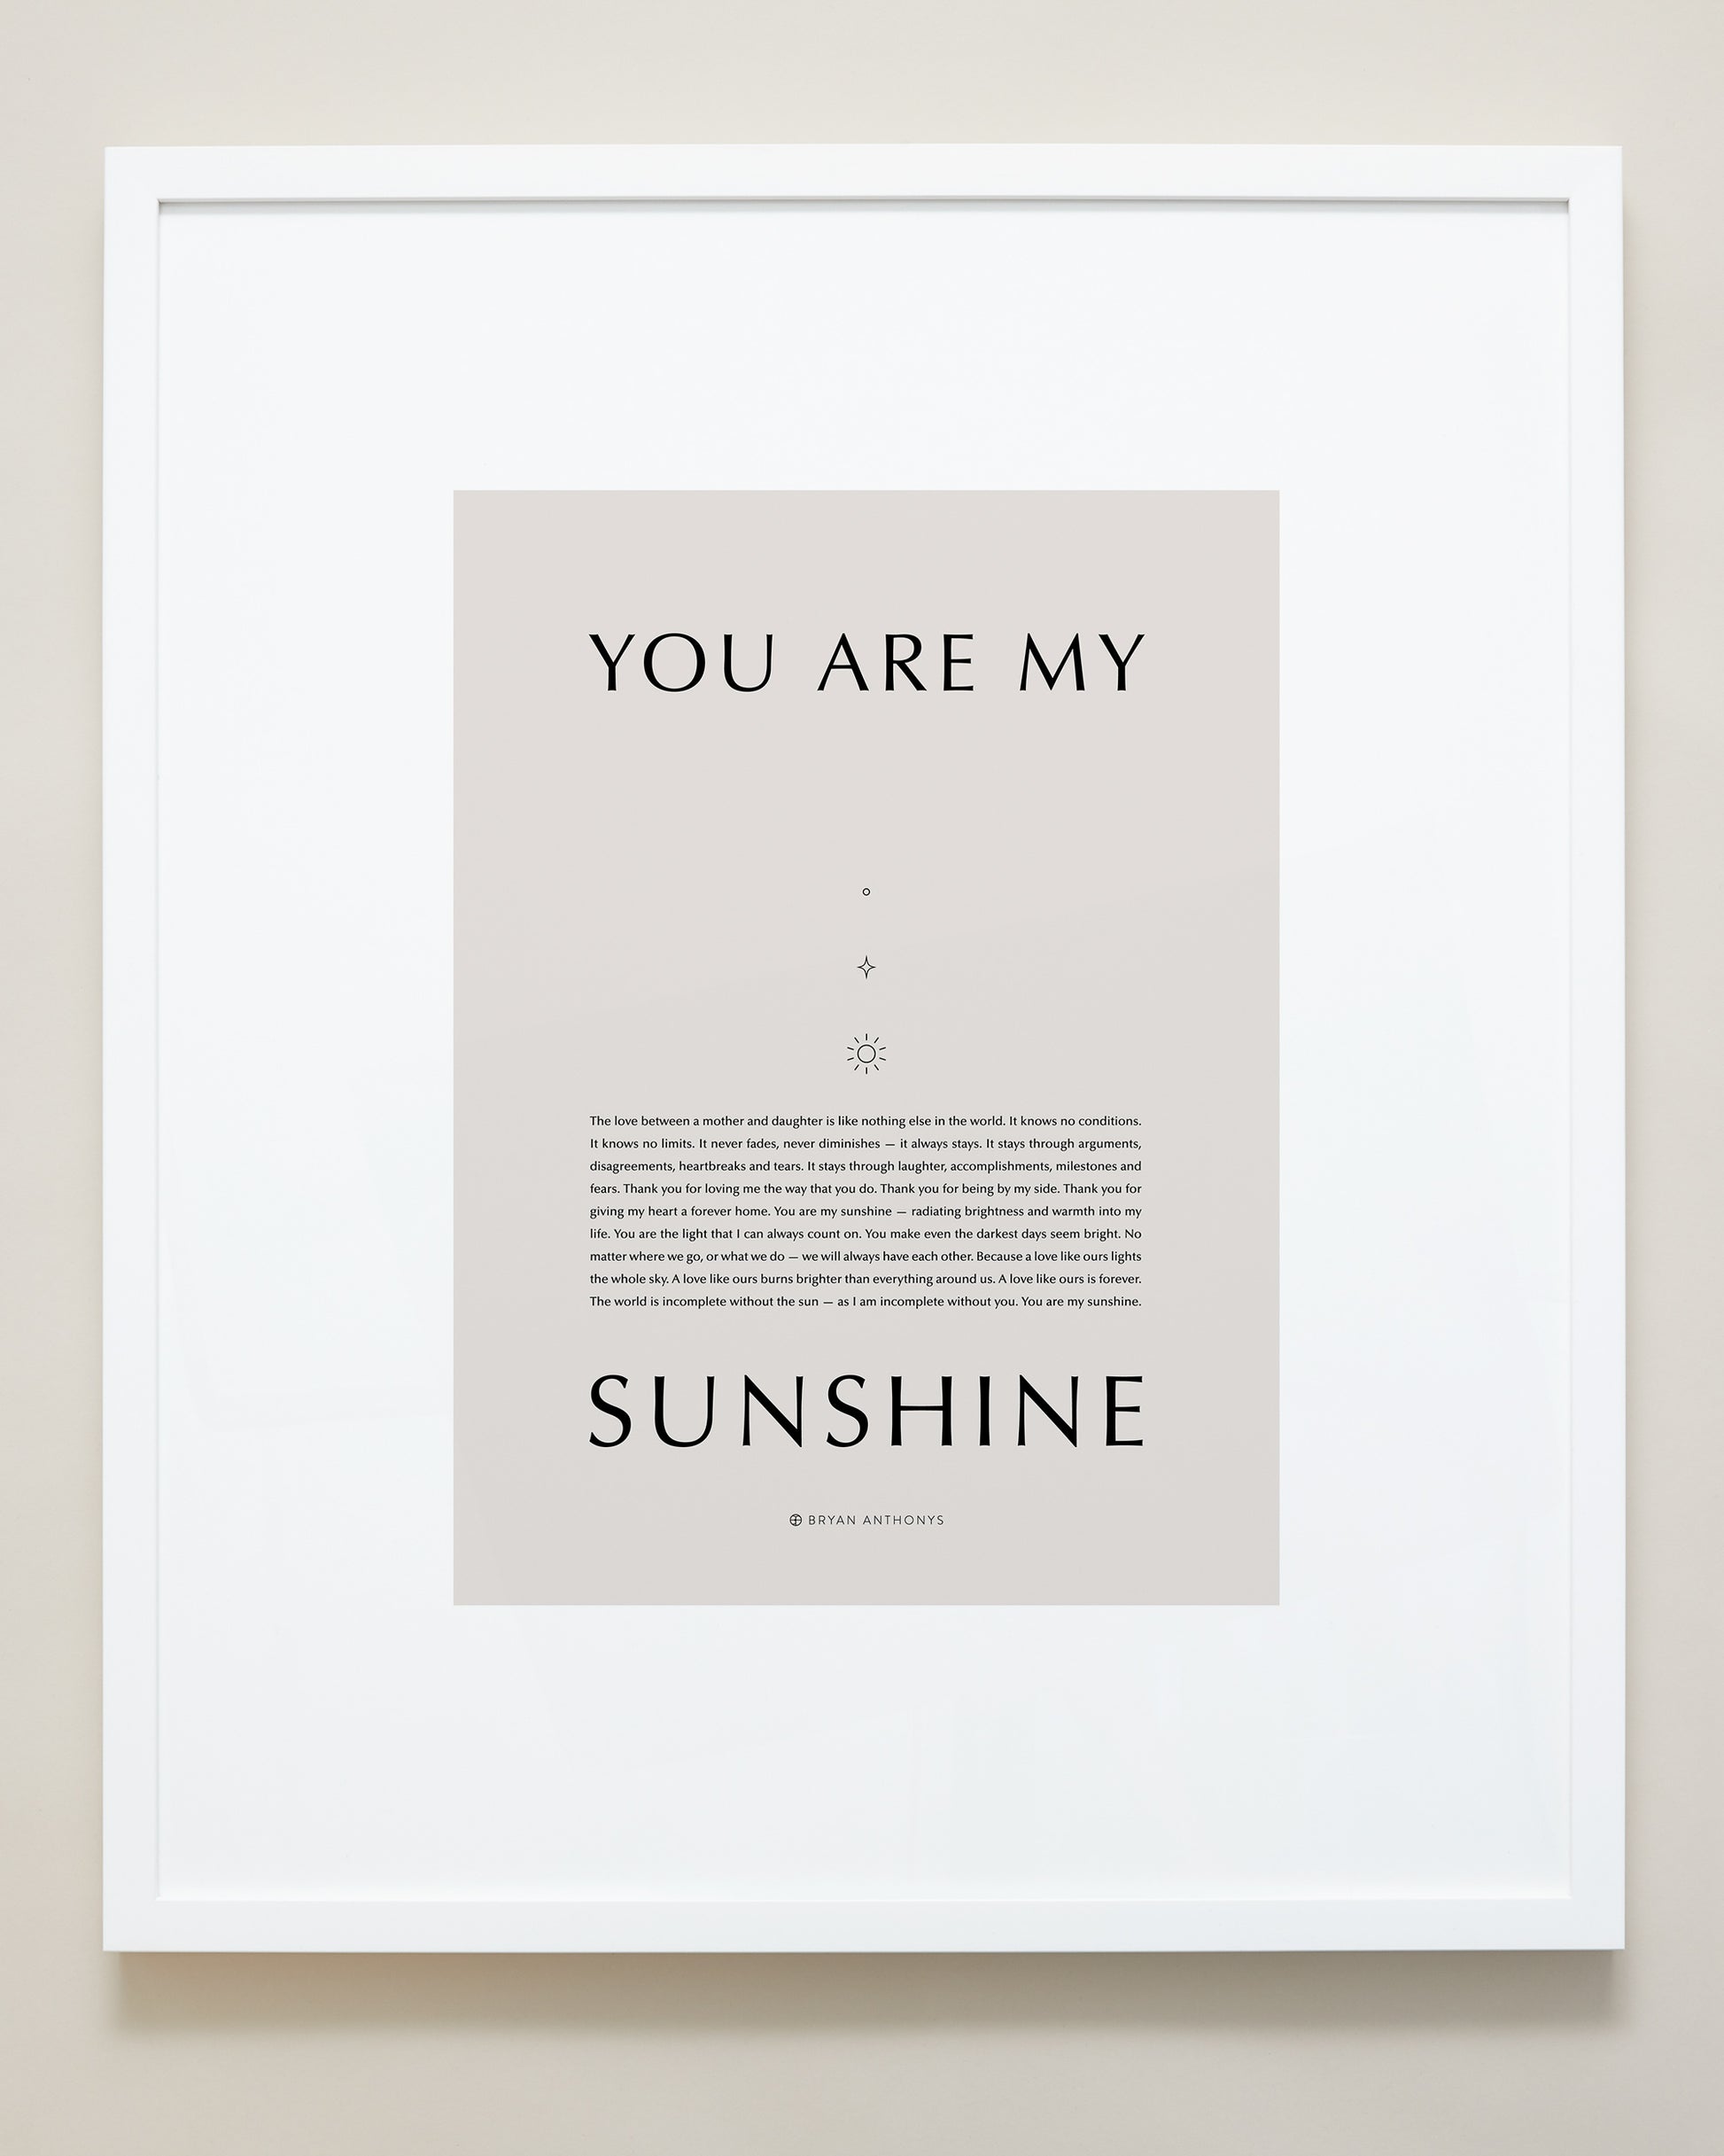 Bryan Anthonys Home Decor Purposeful Prints You Are My Sunshine Iconic Framed Print Tan Art With White Frame 20x24